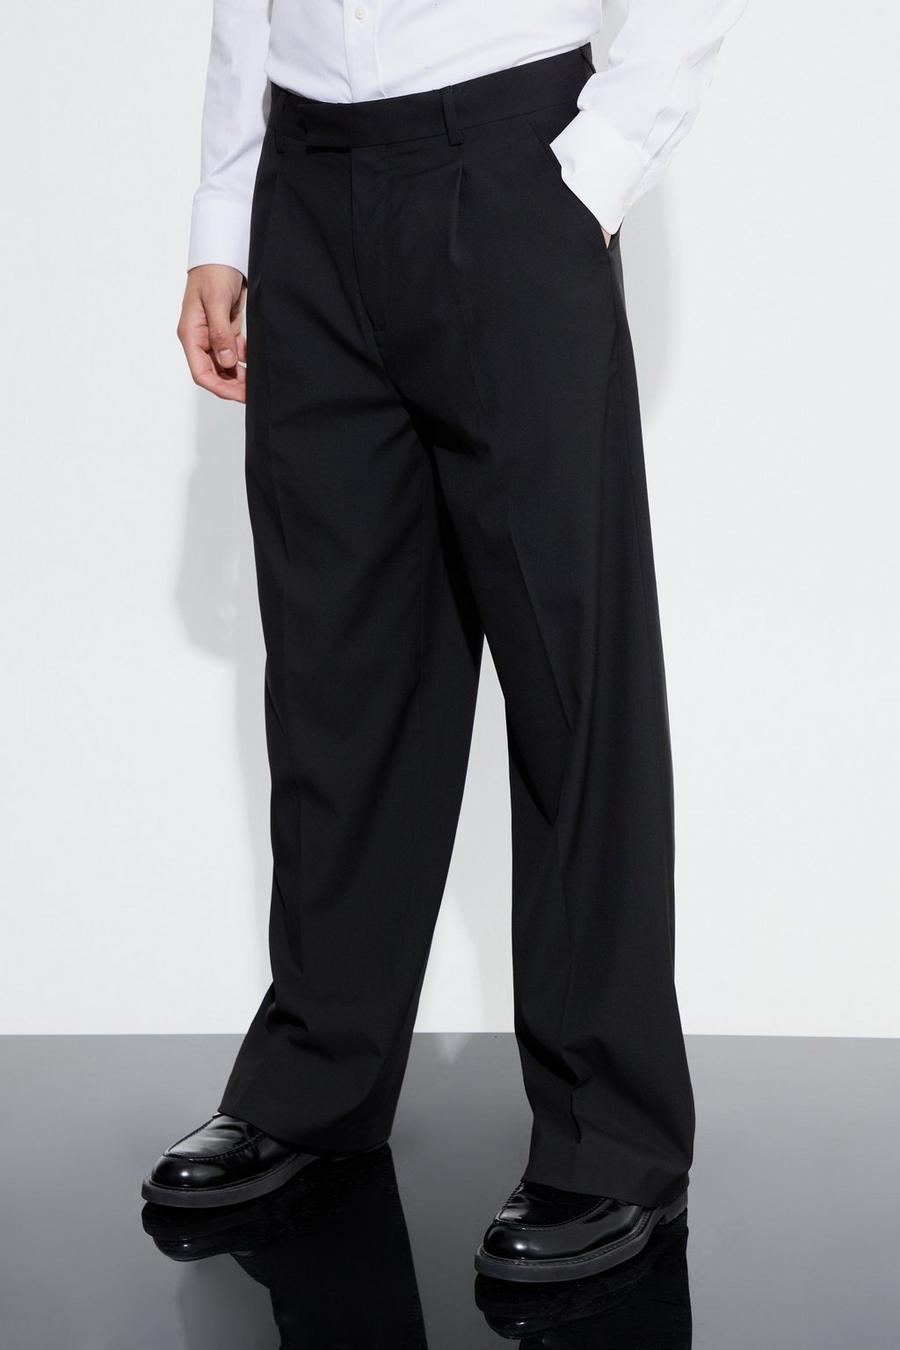 Men's Large Fit Tailored Pants in Black